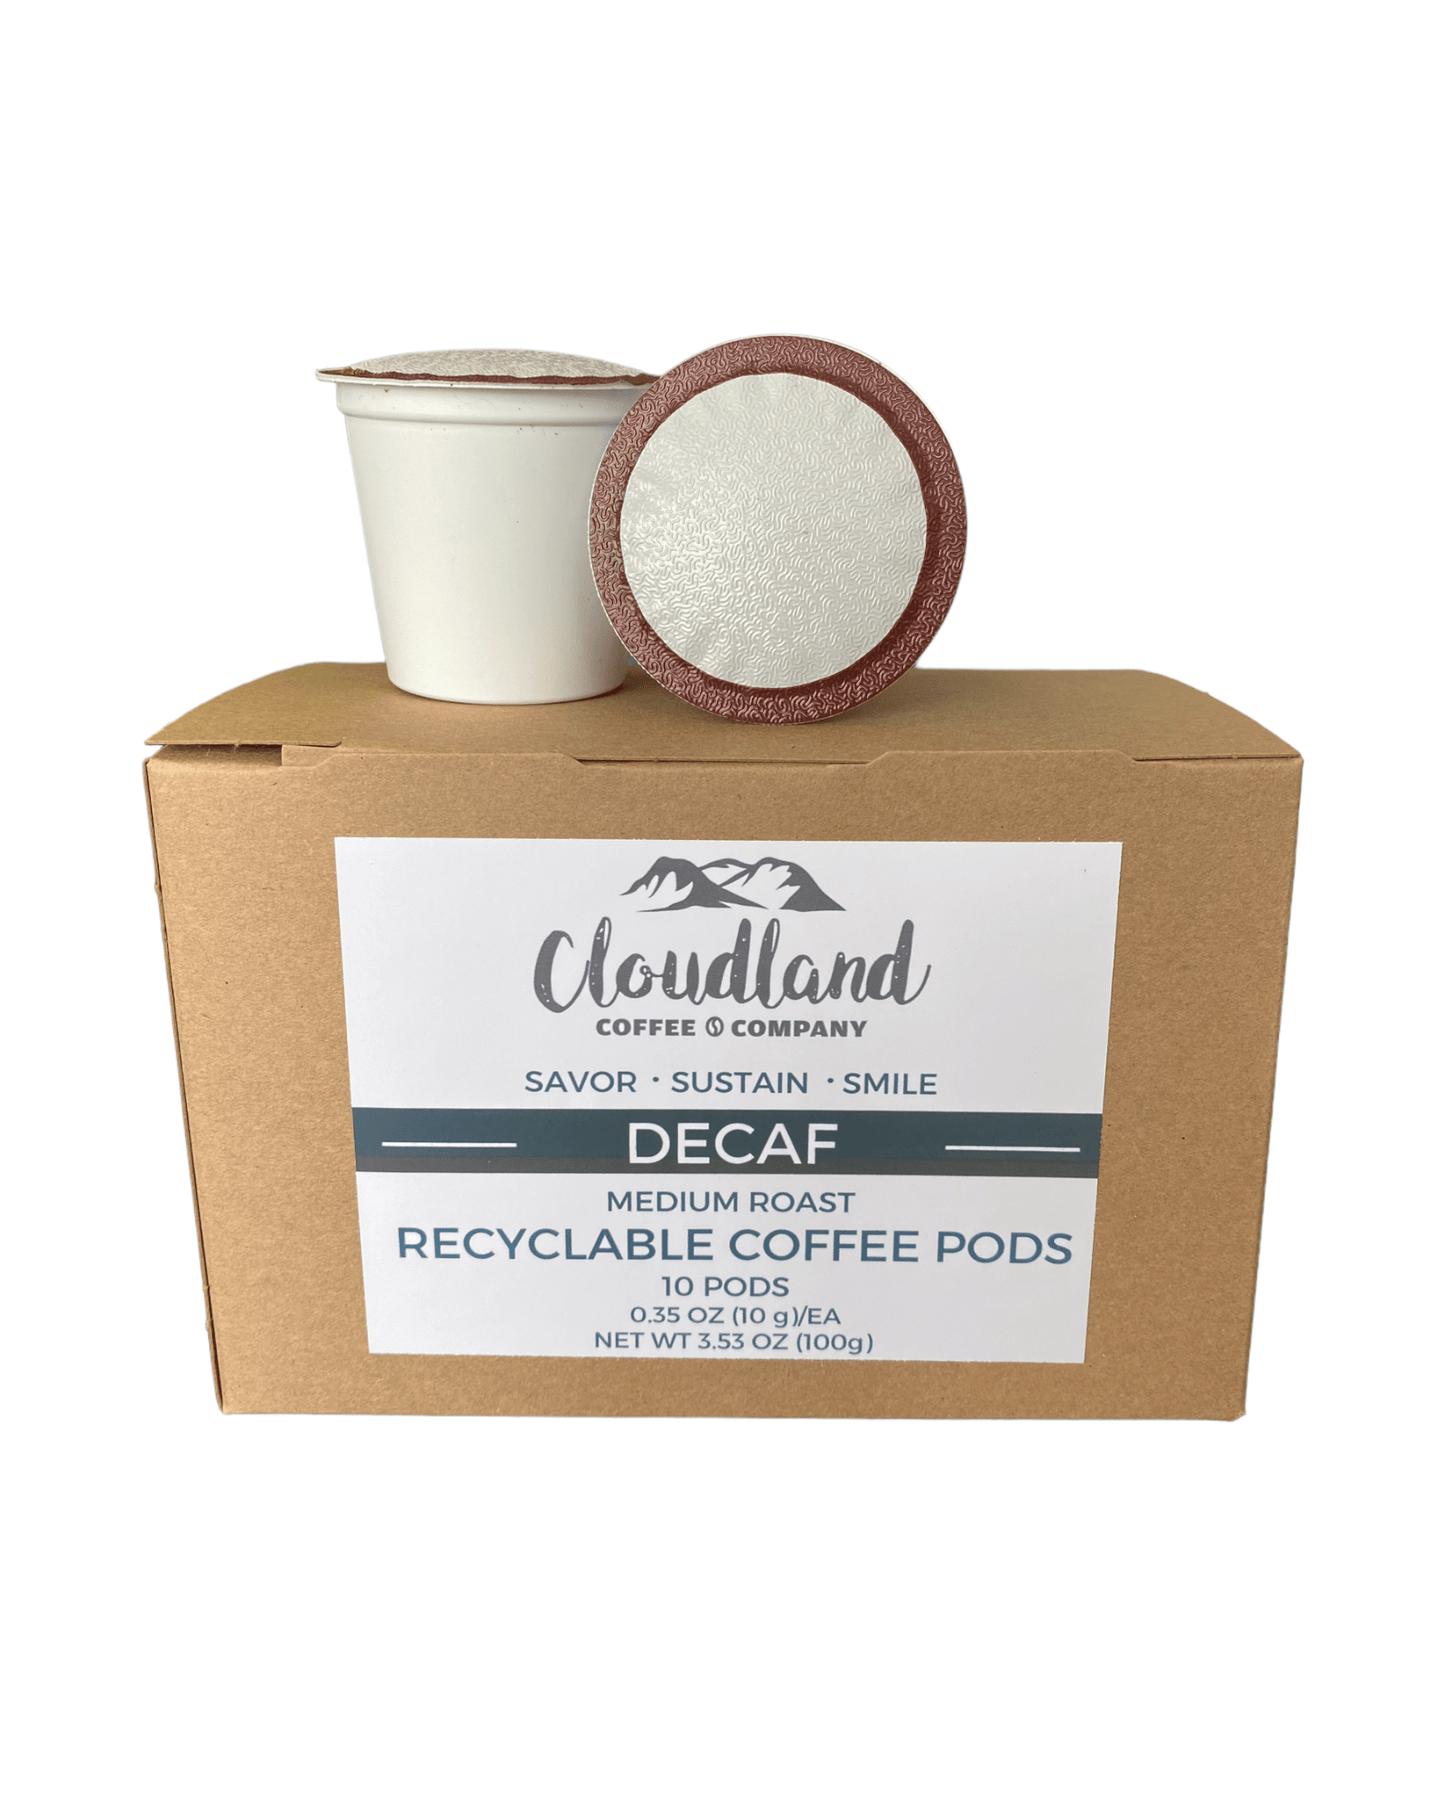 Decaf Recyclable Coffee Pods